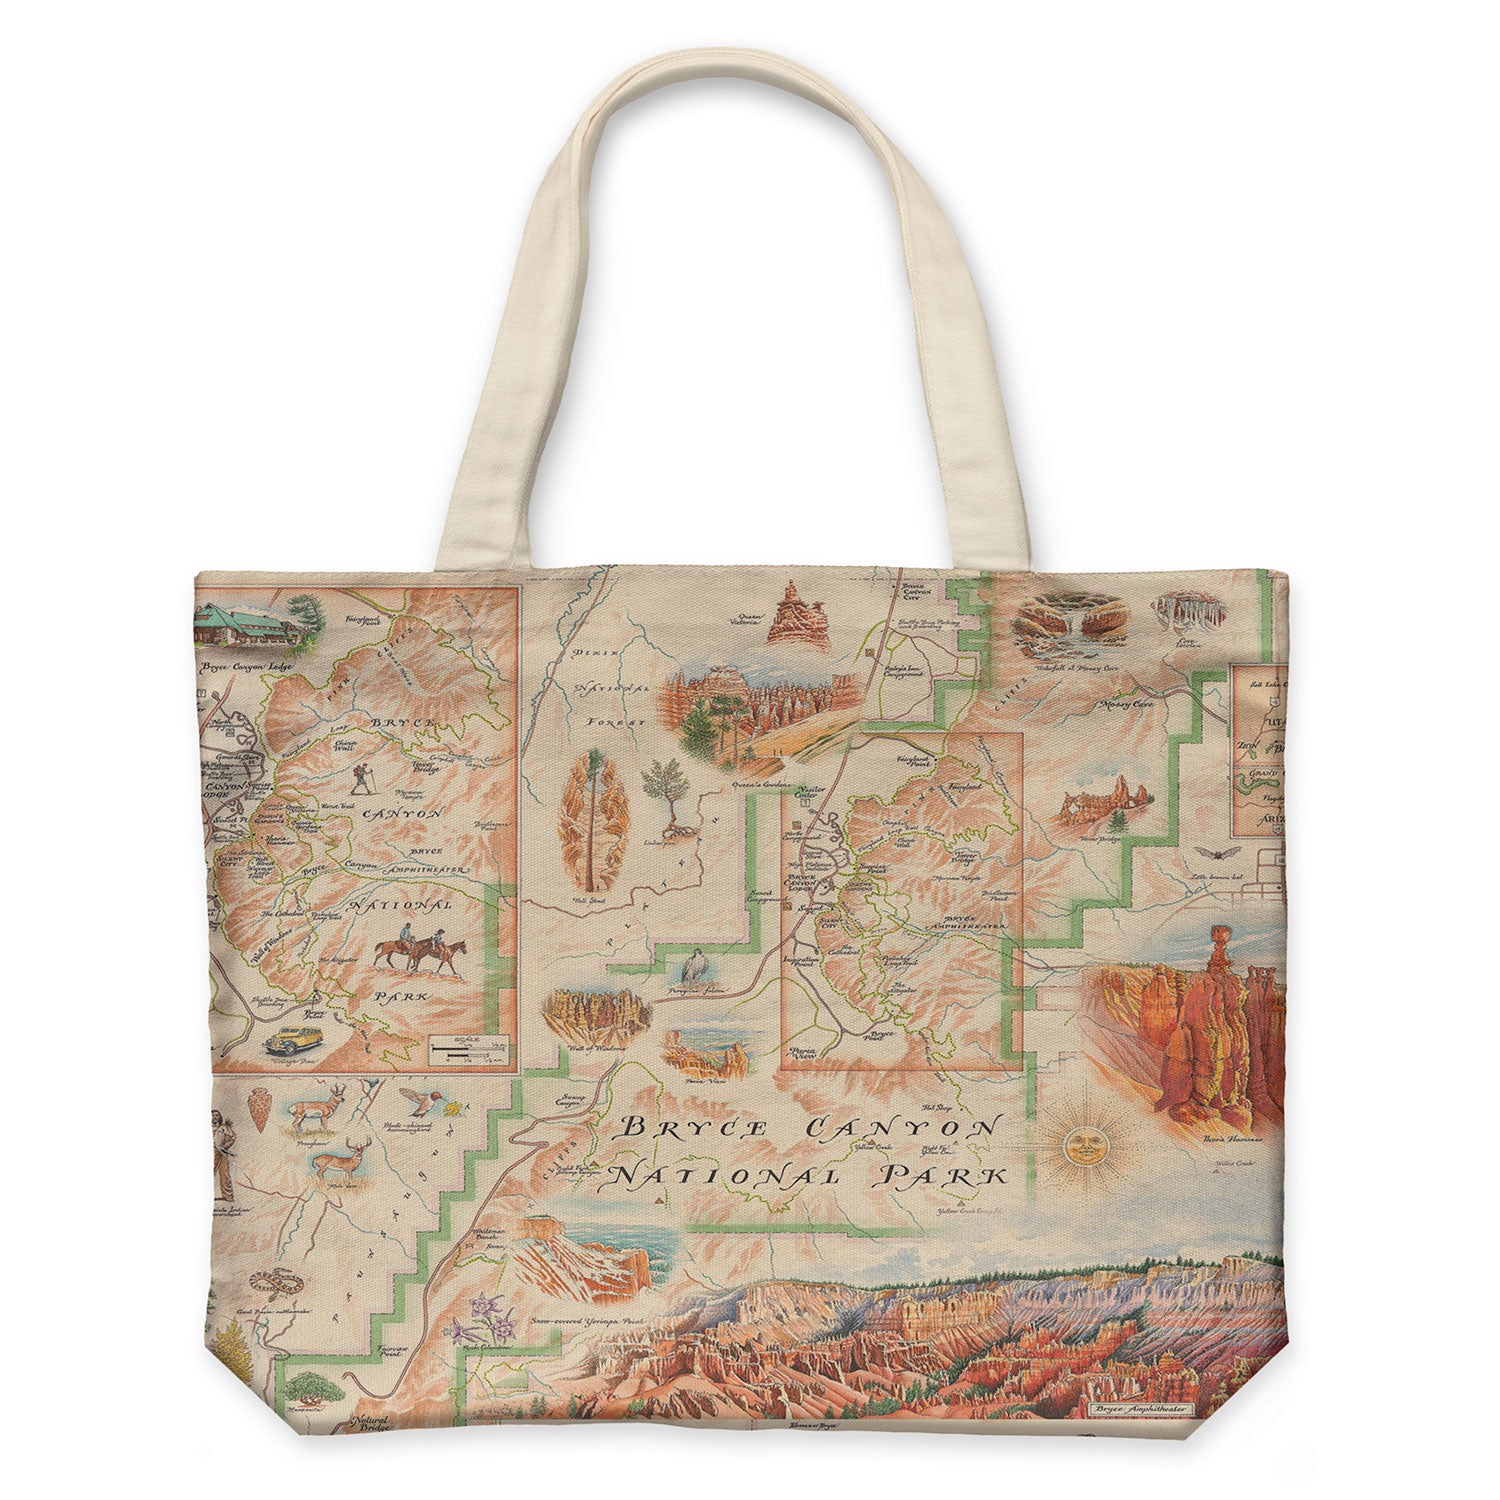 Bryce Canyon National Park Map Canvas Tote Bag on earth tone colors featuring Native people, arrow heads, canyons, horseback, hoodoos, Rim Trail, Pink Cliffs, Claron Formation, Sunset Point, Inspiration Point, Bryce Amphitheater, and Bryce Point. Flora and fauna include birds, coyotes, mountain lions, deer, and snakes.  